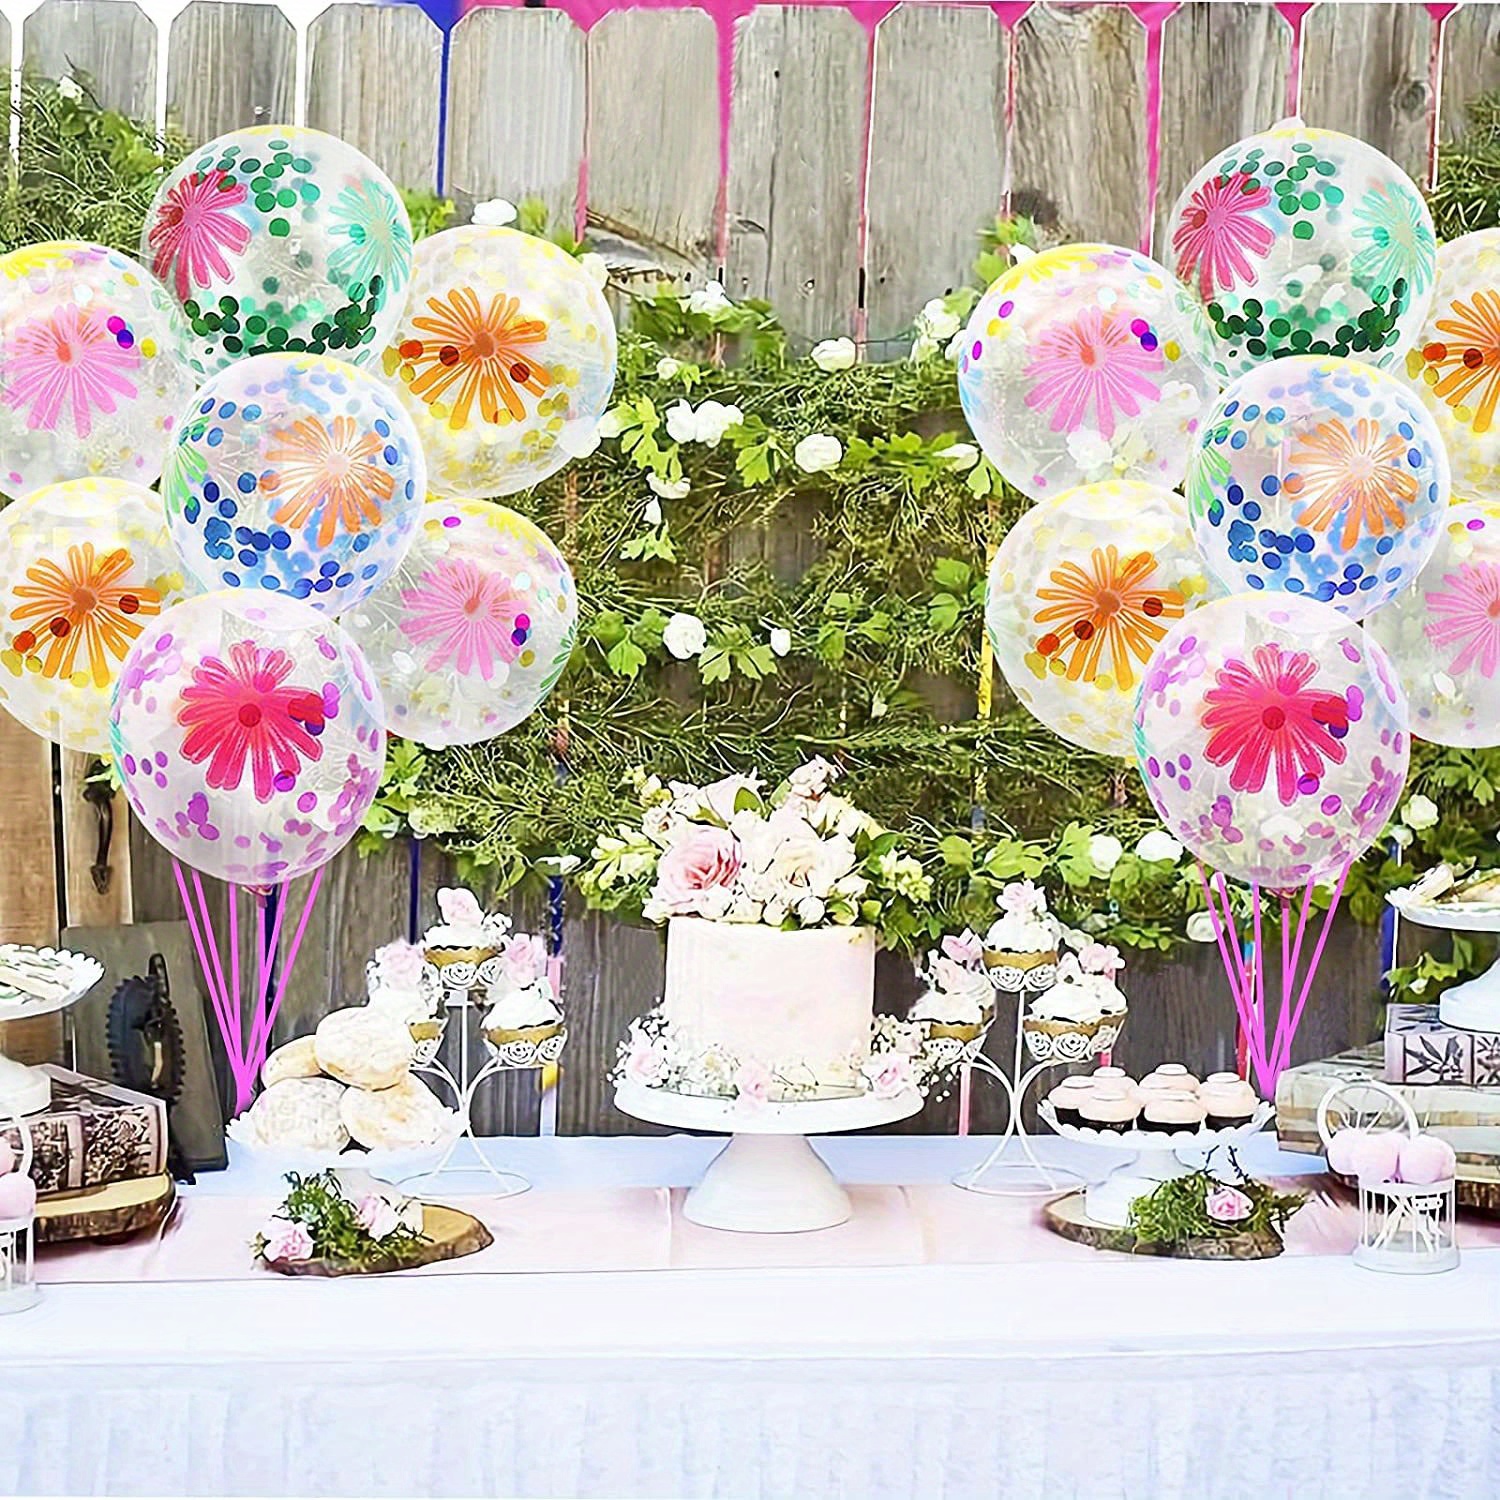 Colorful Wildflower Party Ideas